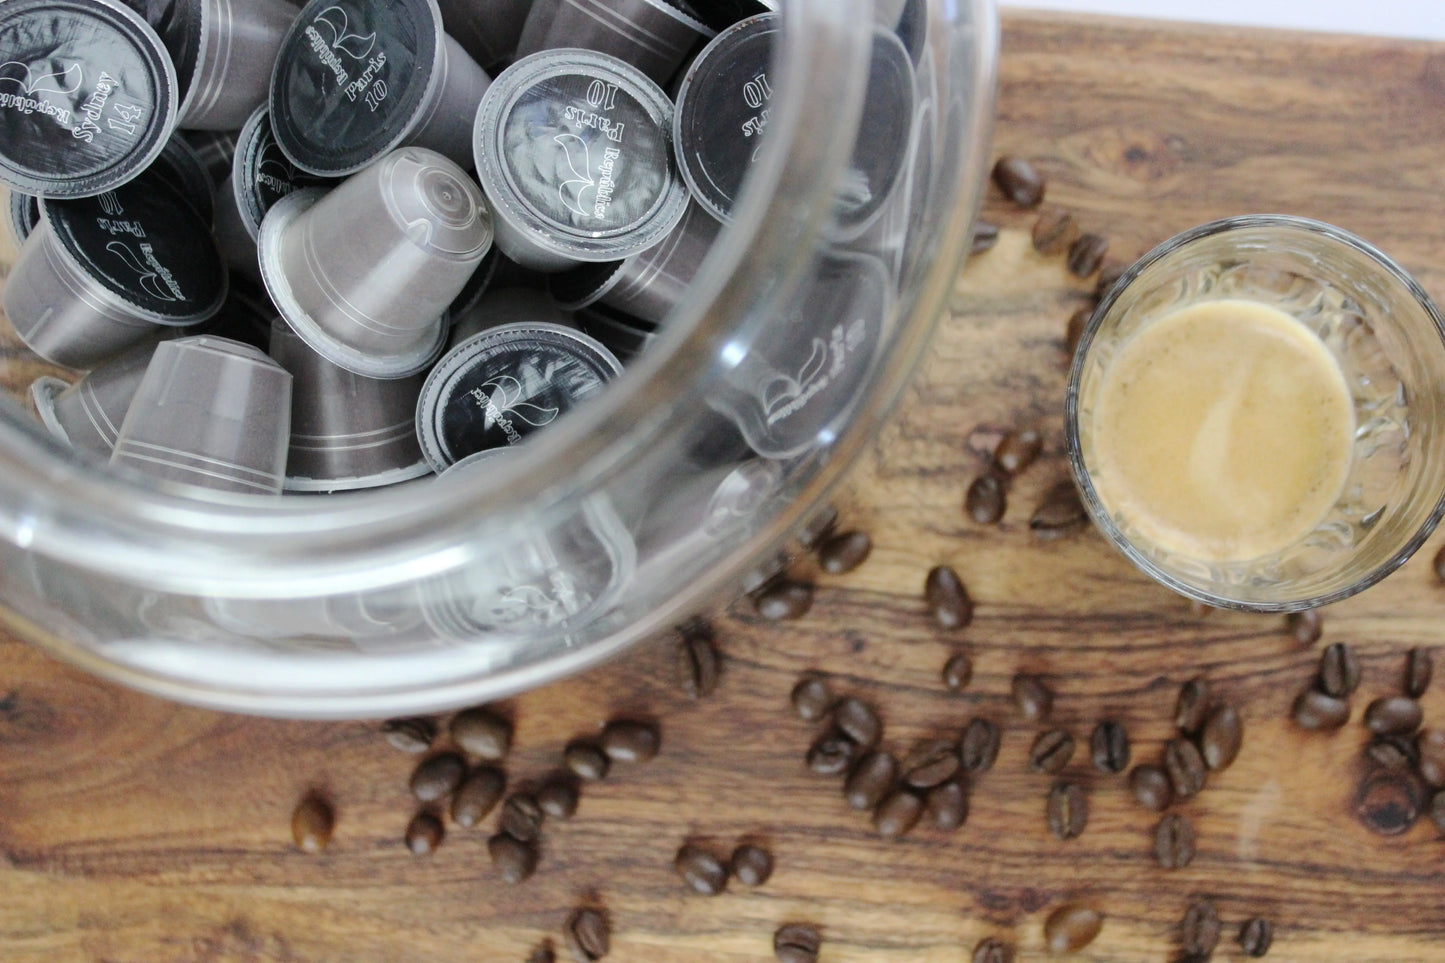 Biodegradable Coffee Pods: Here For A Good Time, Not A Long Time